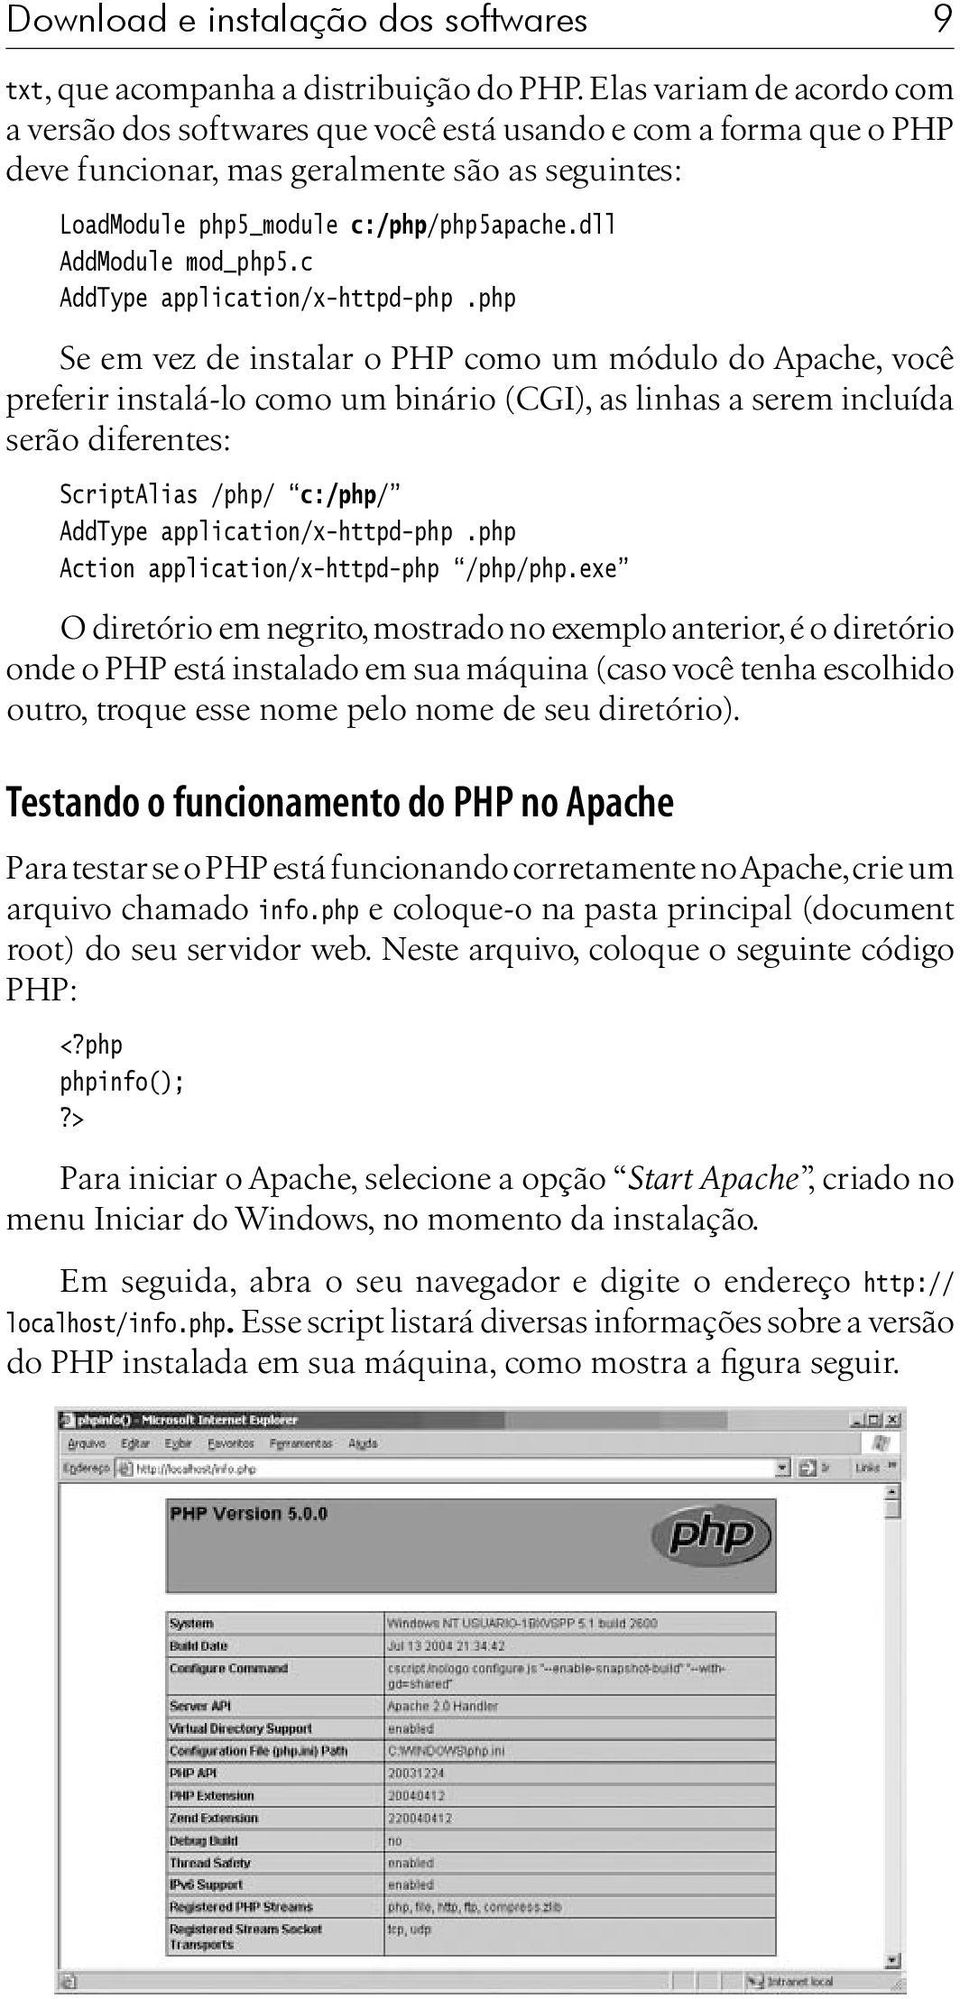 dll AddModule mod_php5.c AddType application/x-httpd-php.